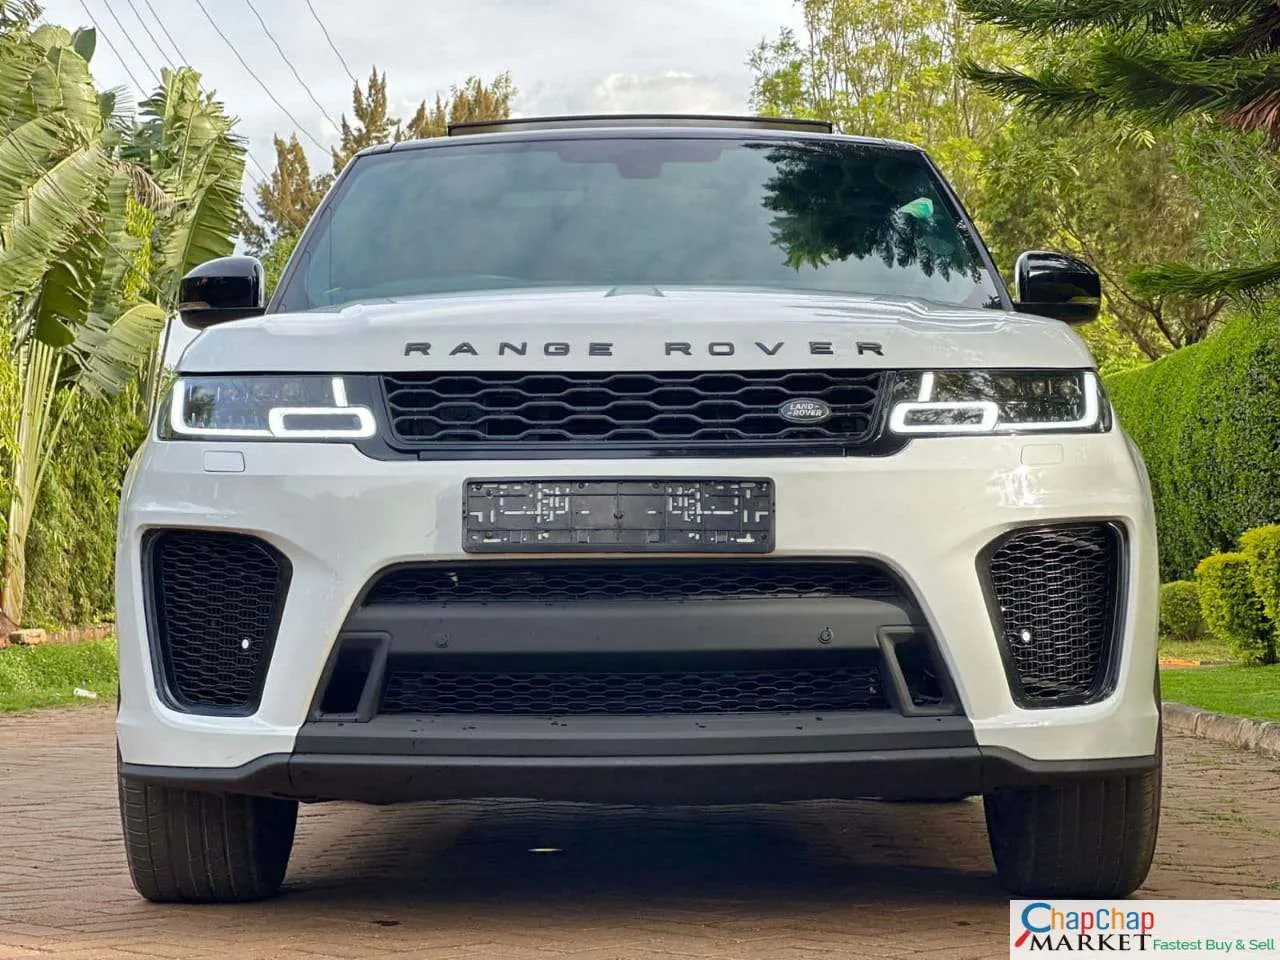 Cars Cars For Sale/Vehicles-Range Rover Sport Petrol 2020 Facelift QUICK SALE You pay 30% deposit Trade in OK EXCLUSIVE 9